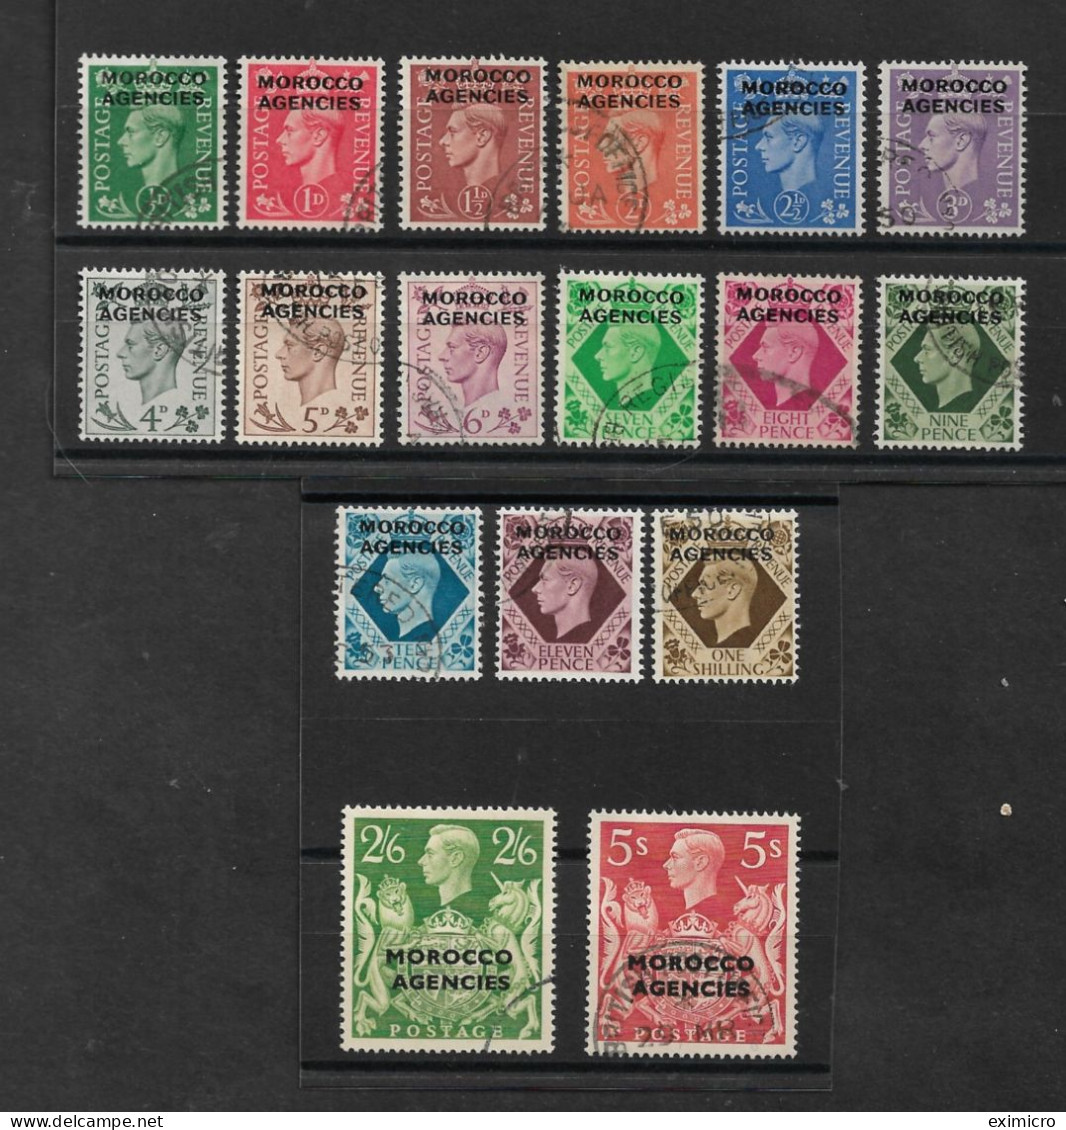 MOROCCO AGENCIES  BRITISH CURRENCY 1949 SET SG 77/93 FINE USED Cat £250 - Morocco Agencies / Tangier (...-1958)